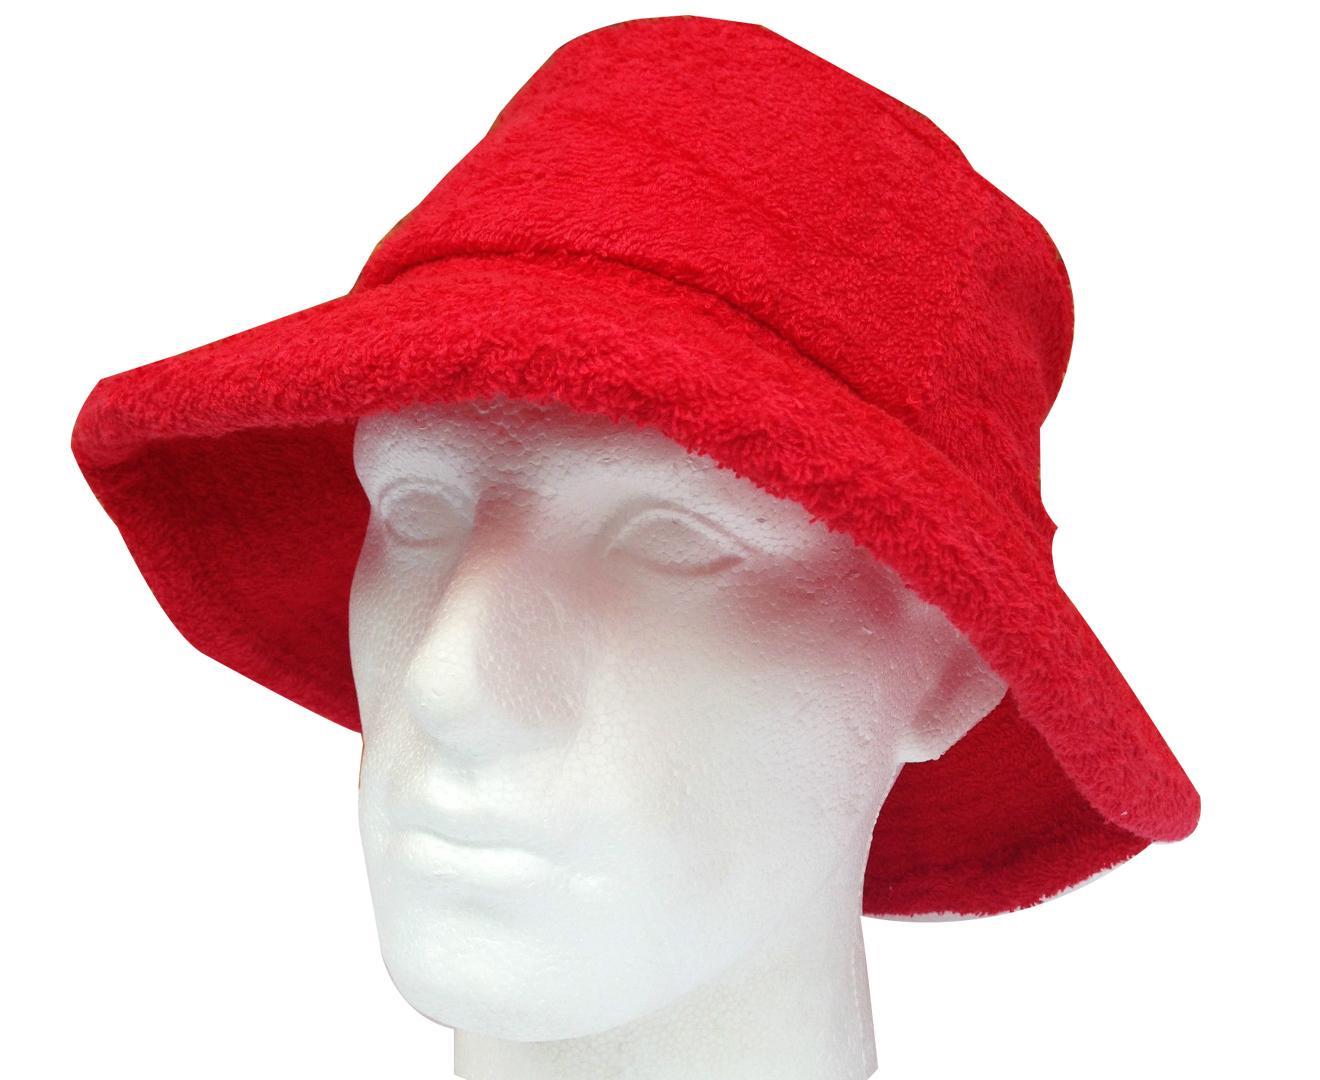 Terry Towelling BUCKET HAT Daggy Fishing Camping Lad Cap Retro 100% COTTON - Red - Large